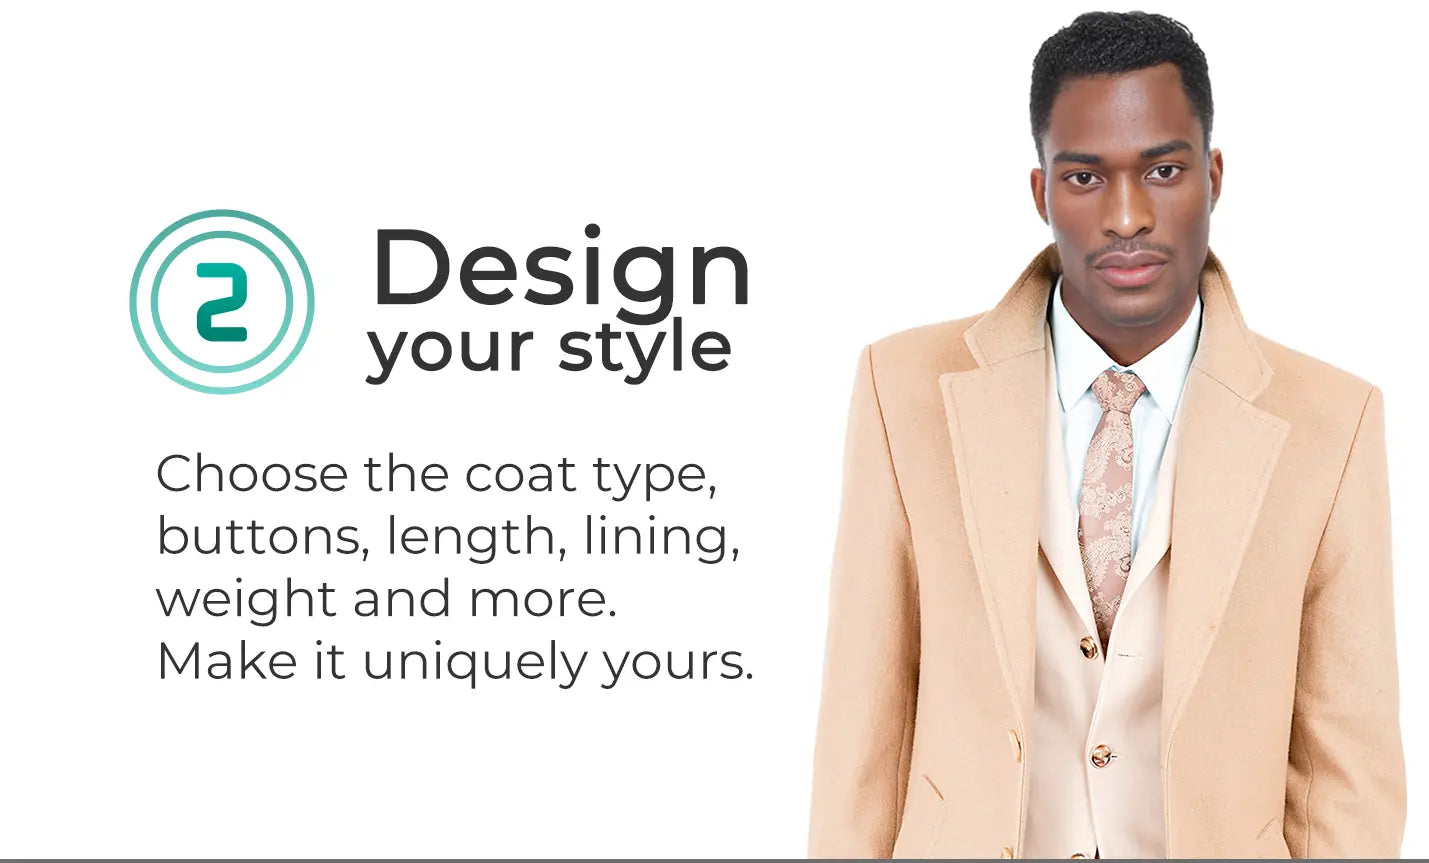 Design your style. Choose the coat type, buttons, length, lining, weight and more. Make it uniquely yours.